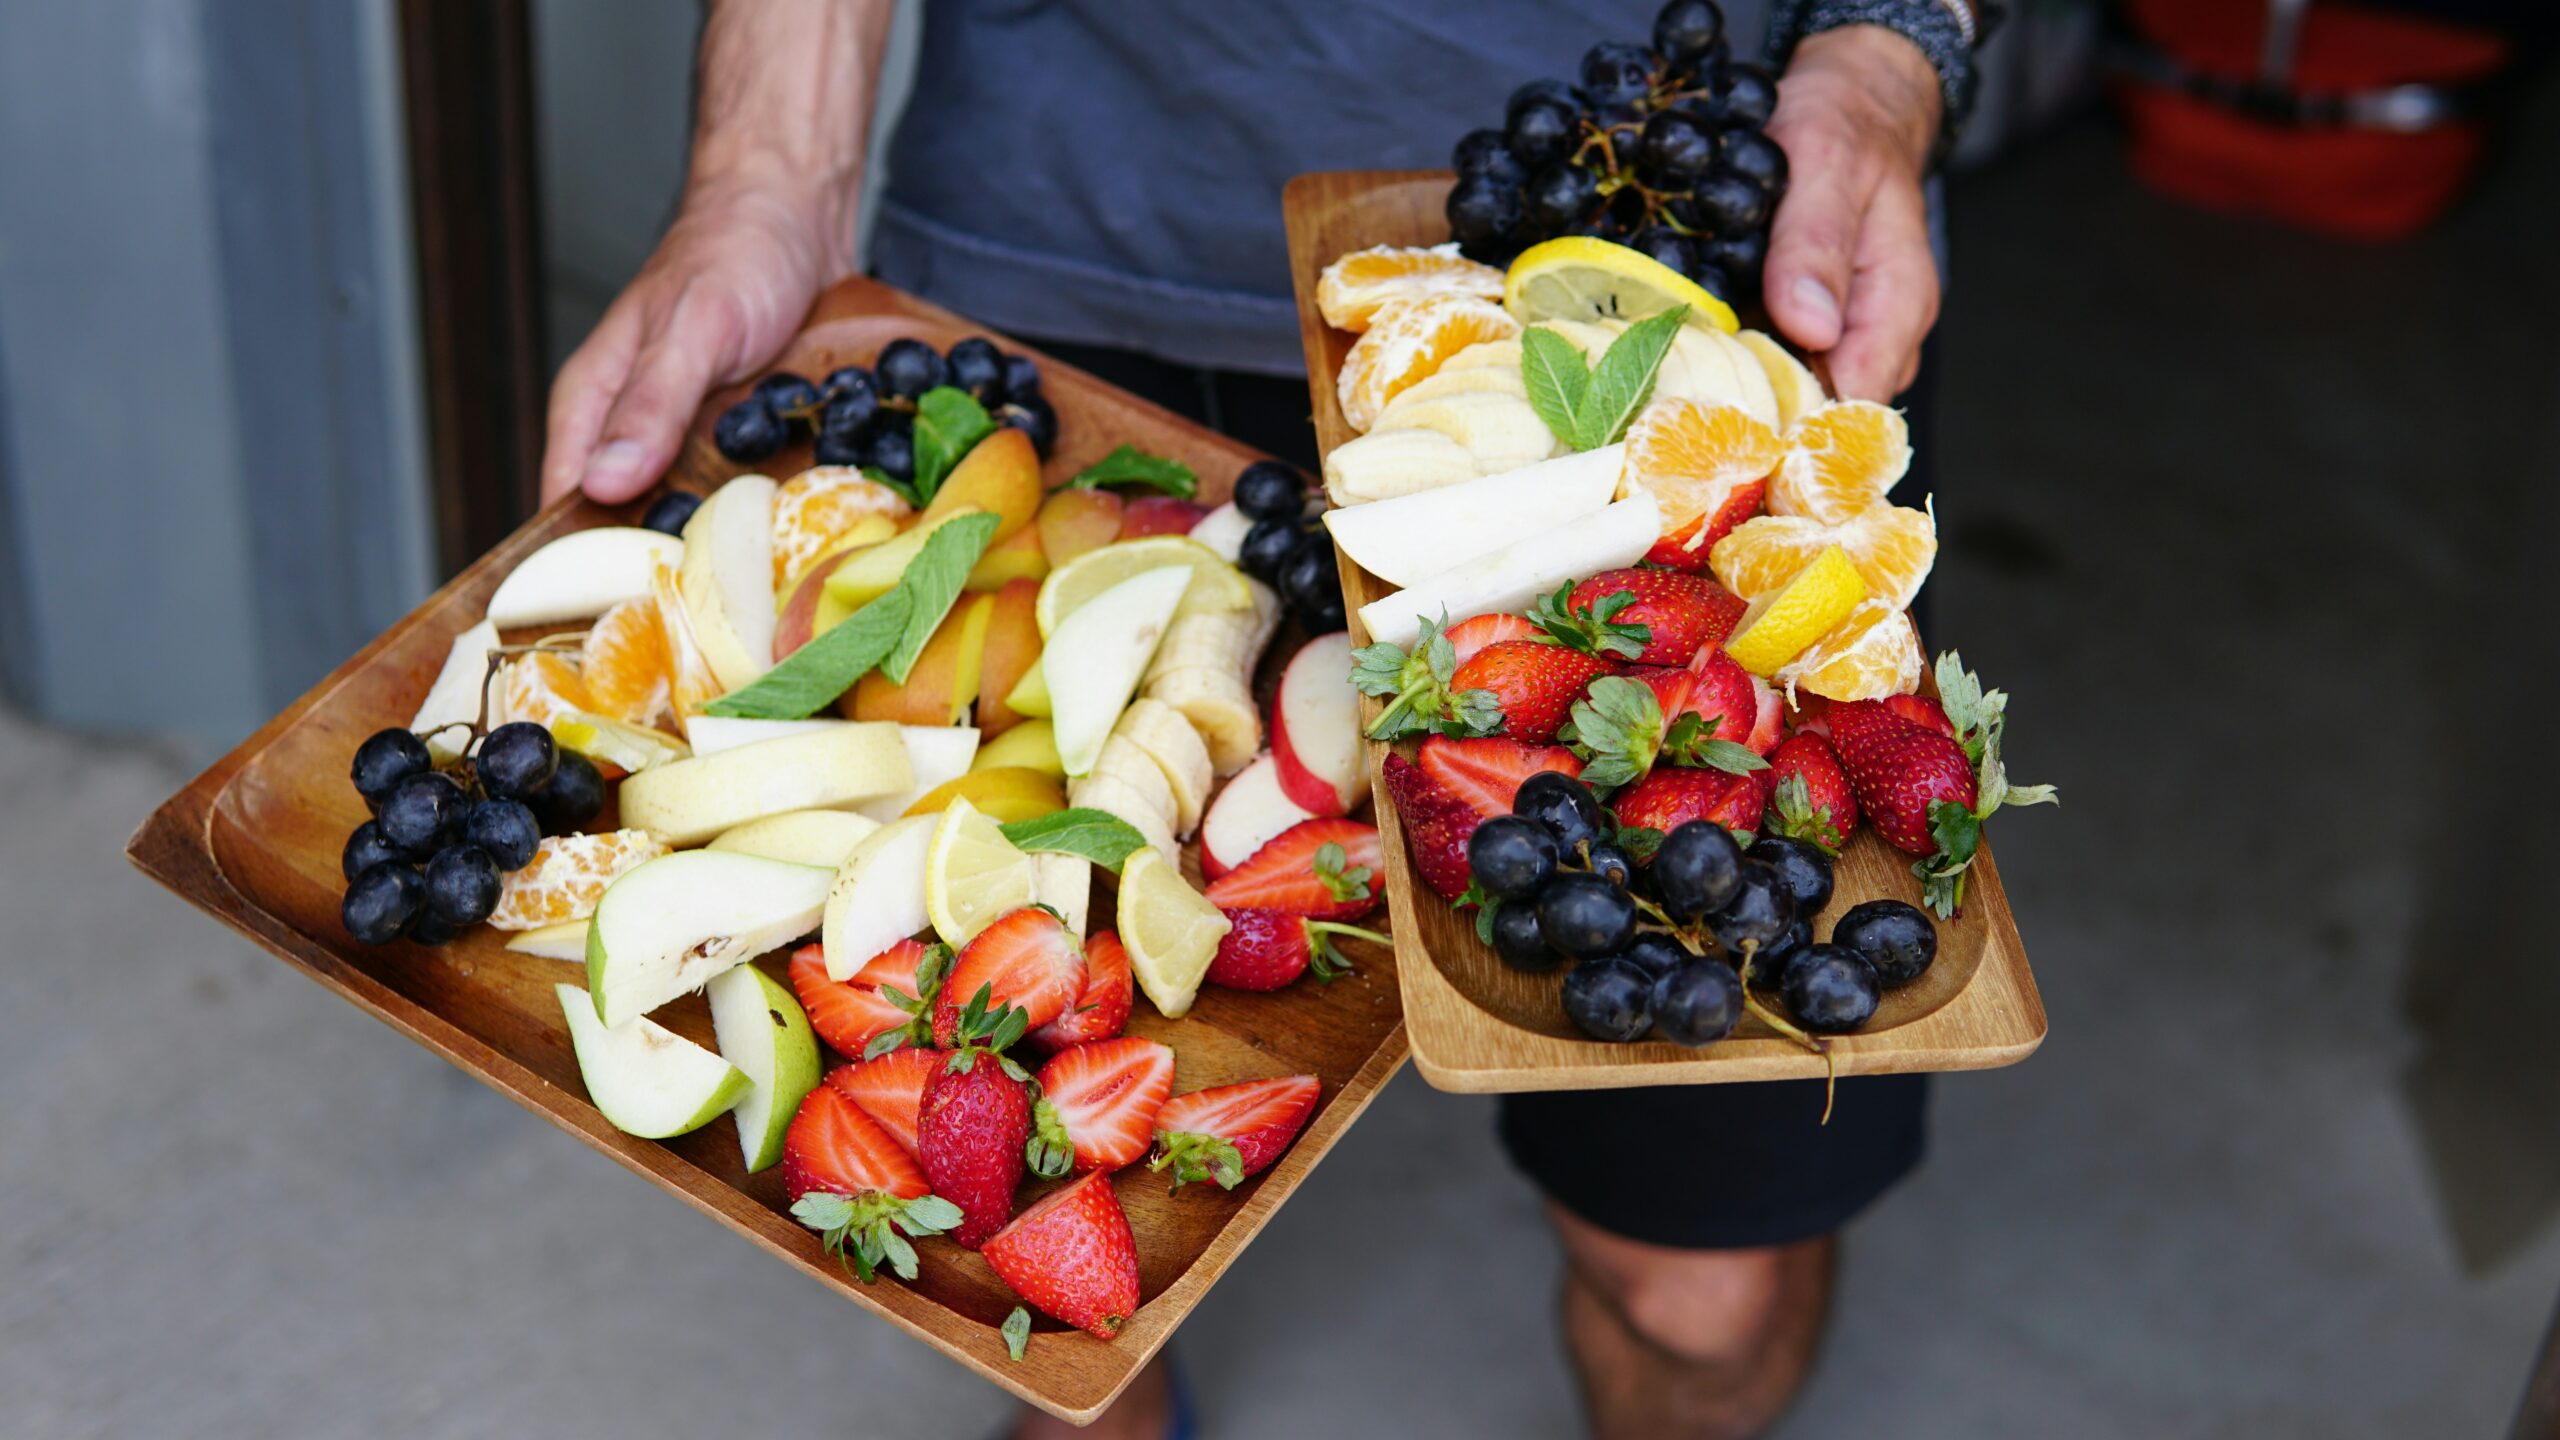 Person holding two trays of fresh-cut, colorful food.